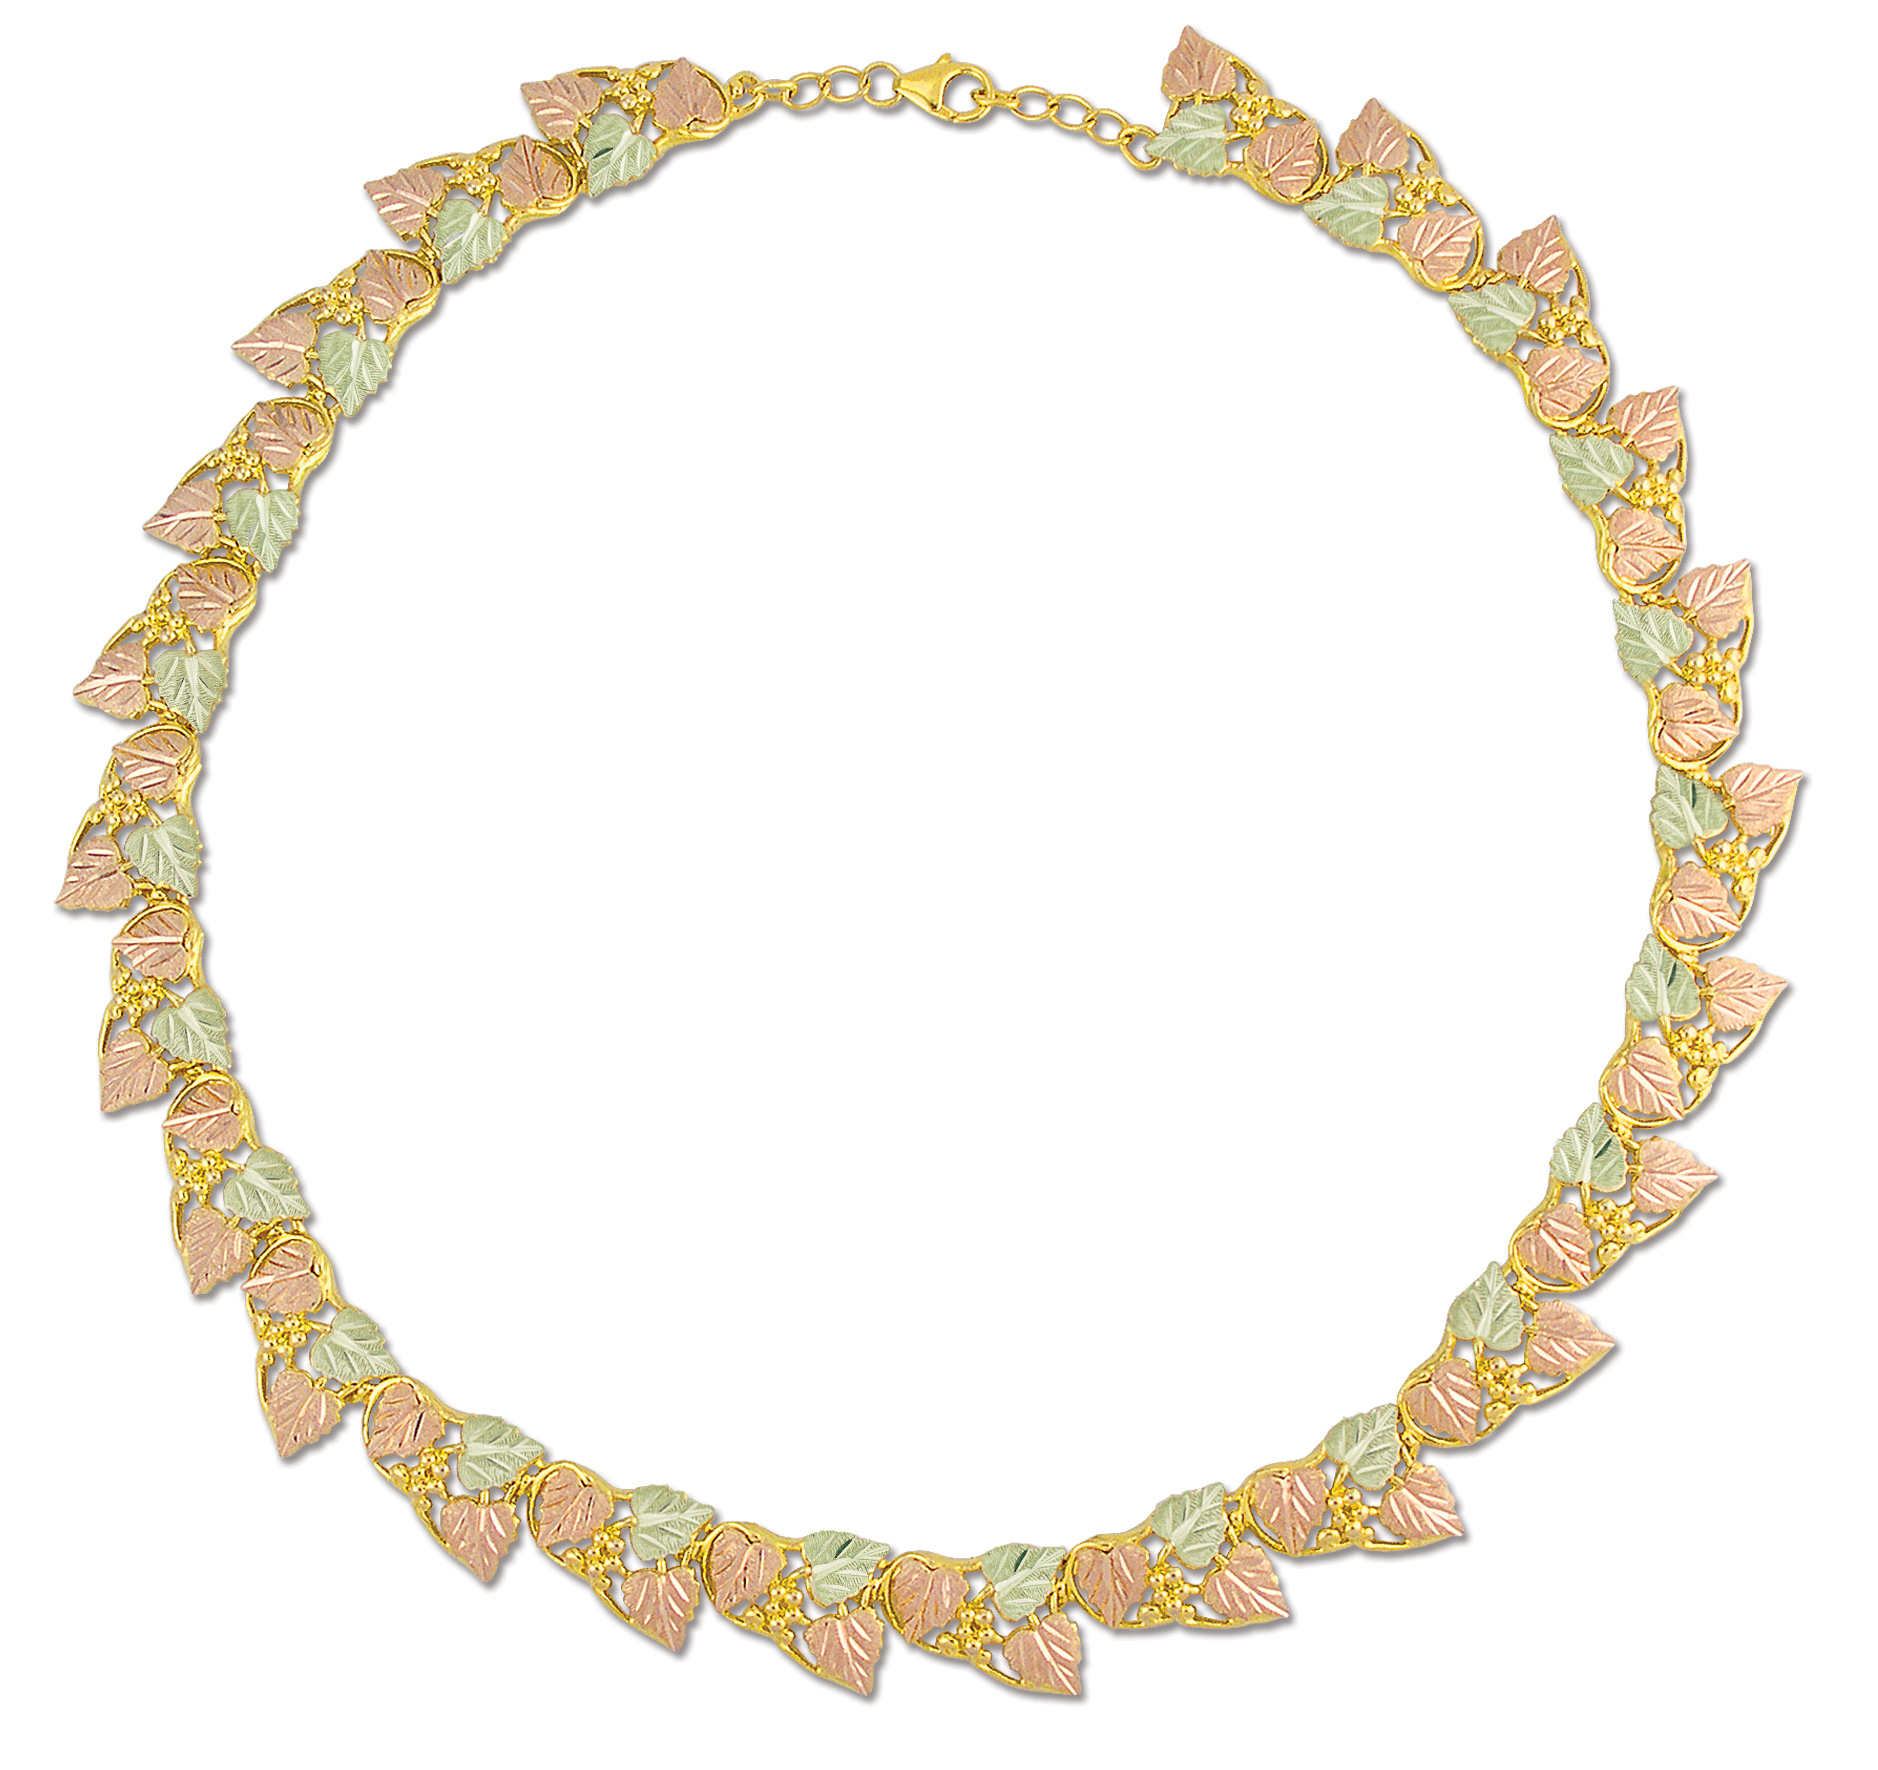 Black Hills Gold Necklace chain with multi grape leaf clusters. 